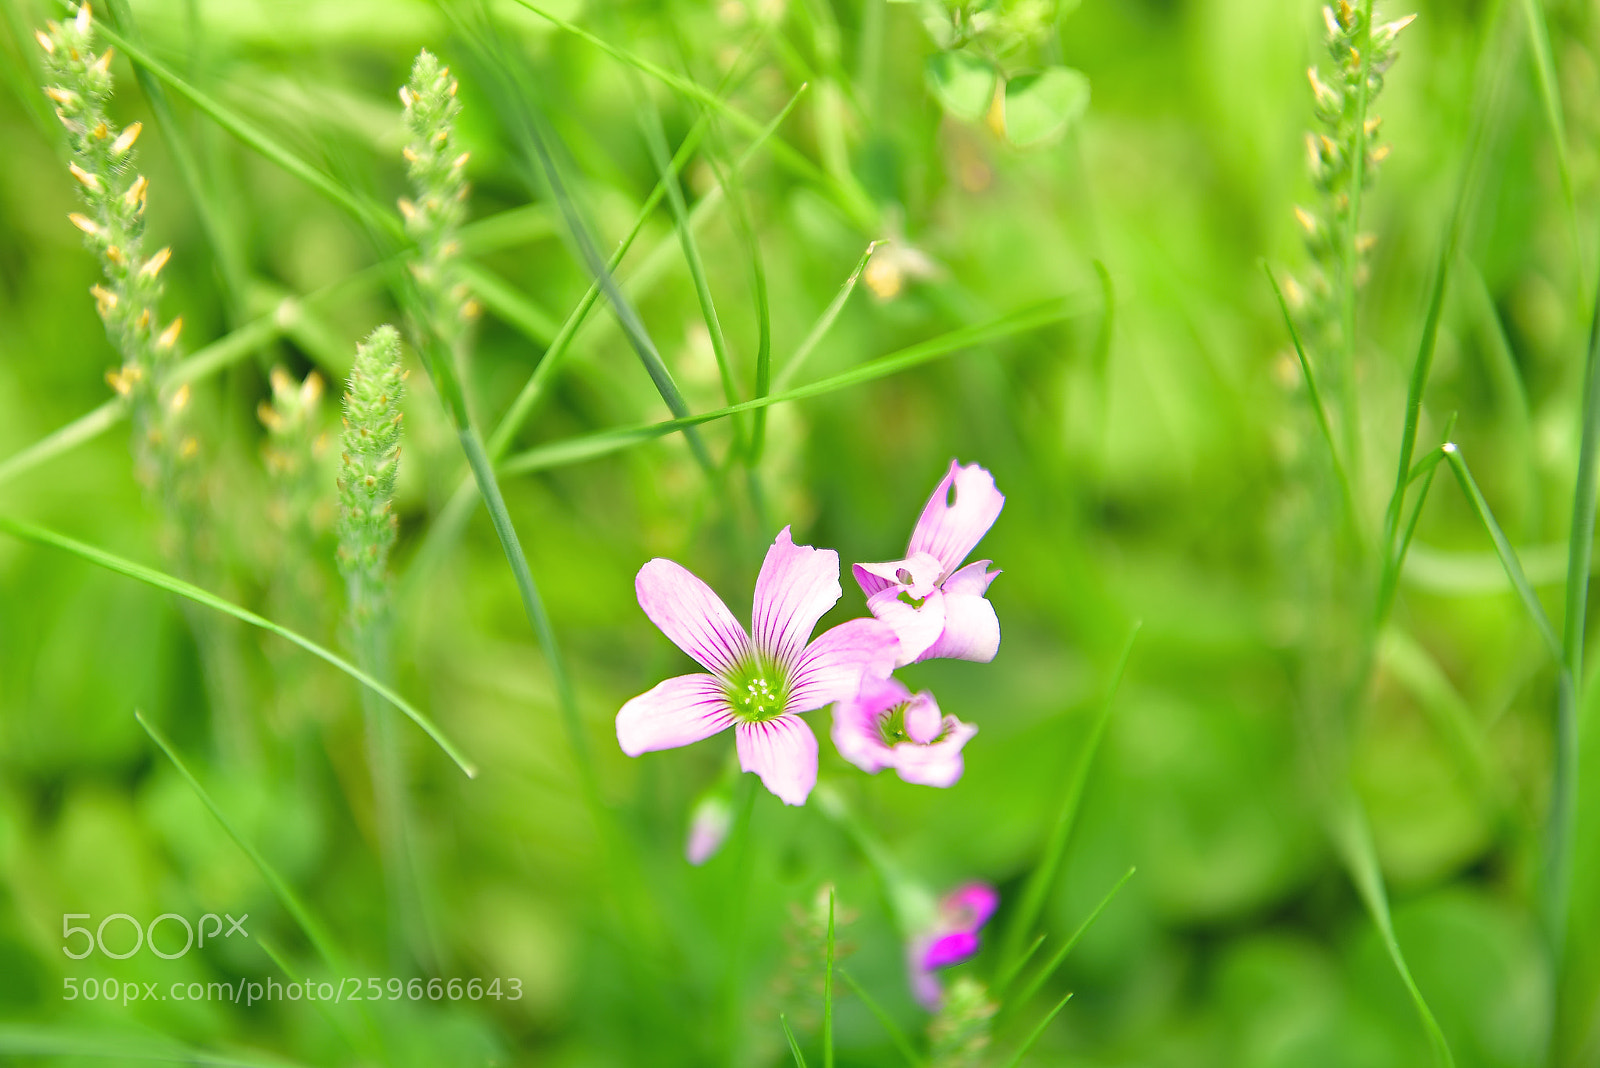 Nikon D800E sample photo. Small flowers blooming in photography